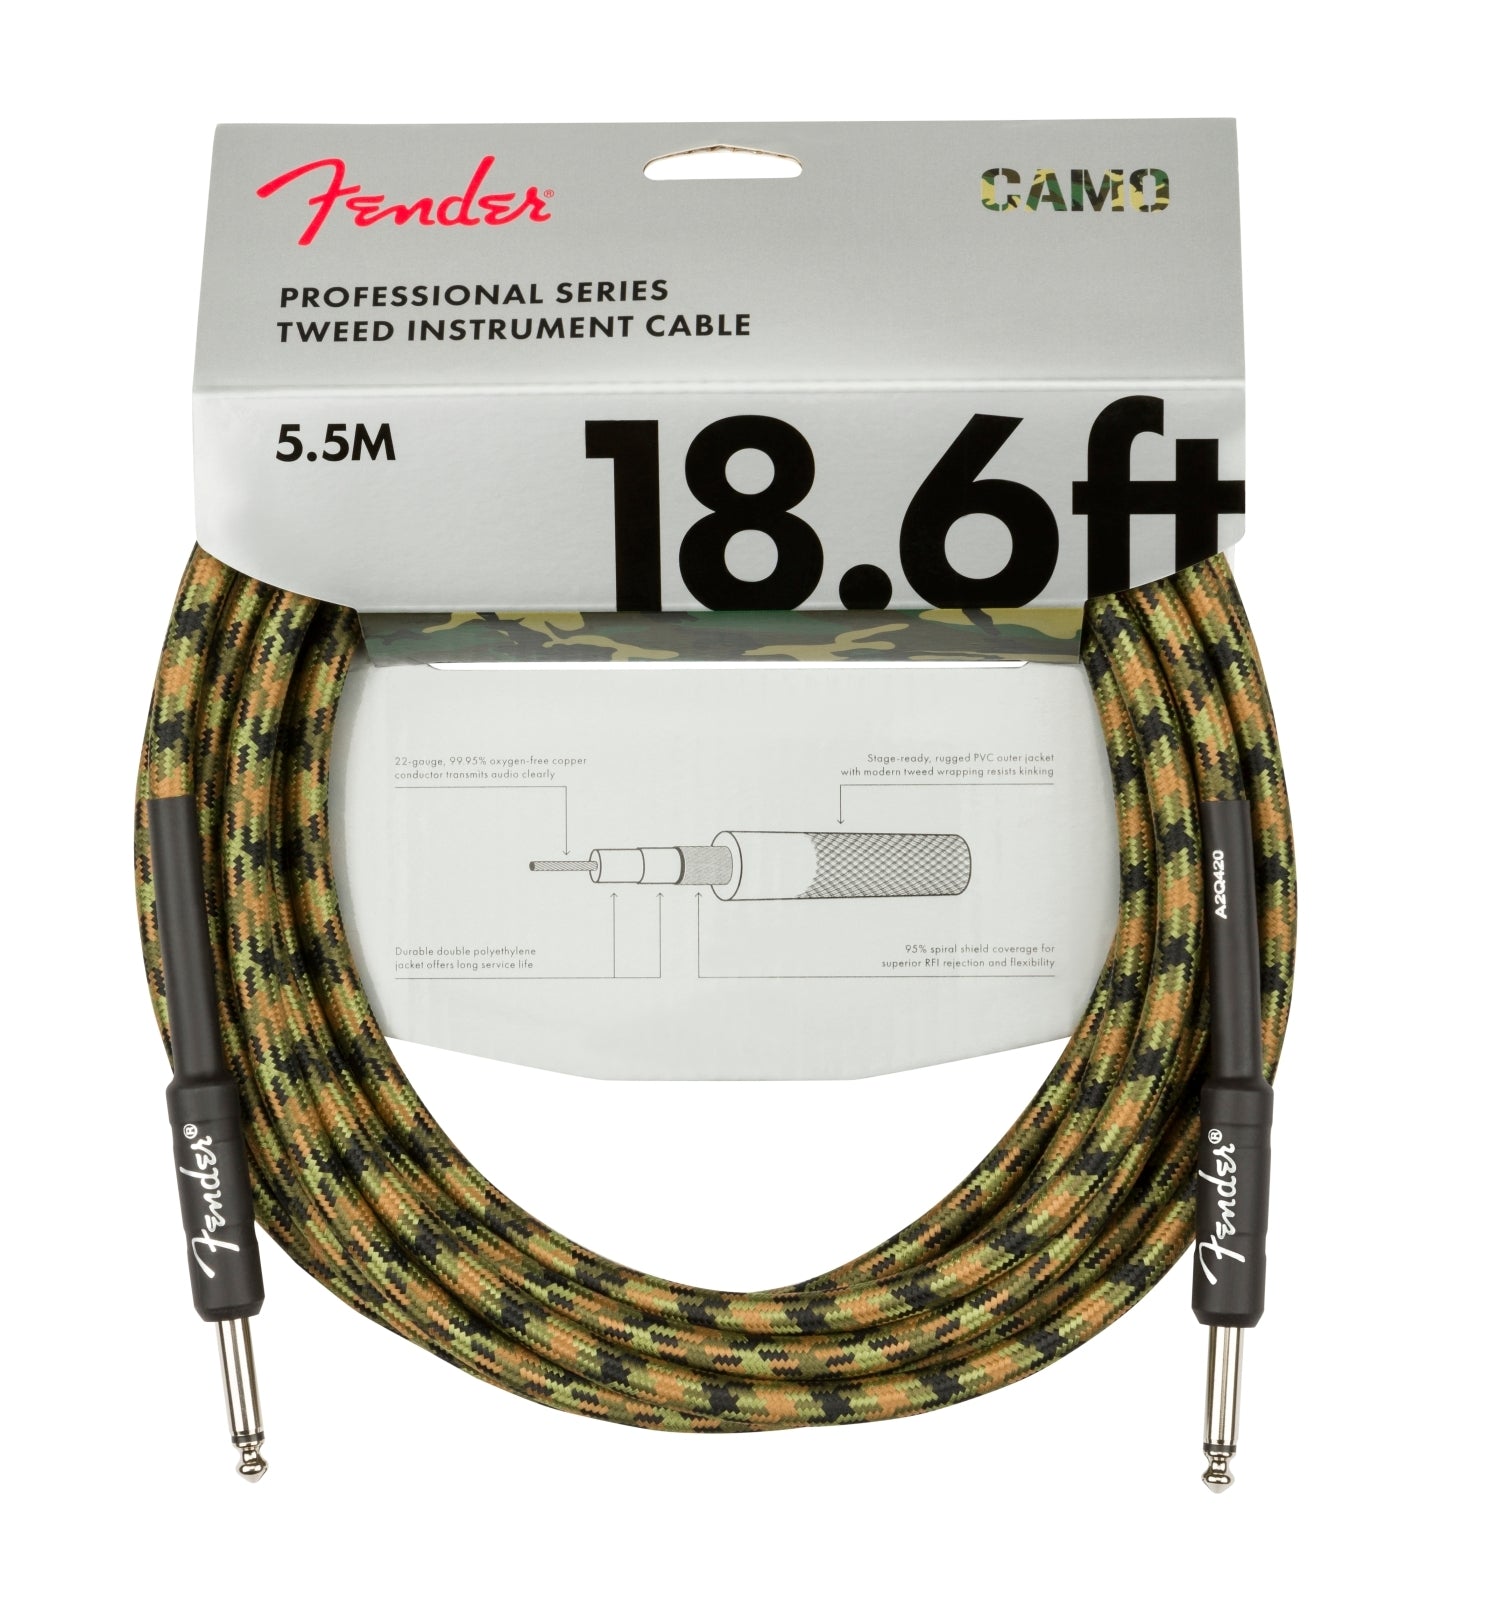 Fender Professional Series 18.6' Instrument Cable - Woodland Camo